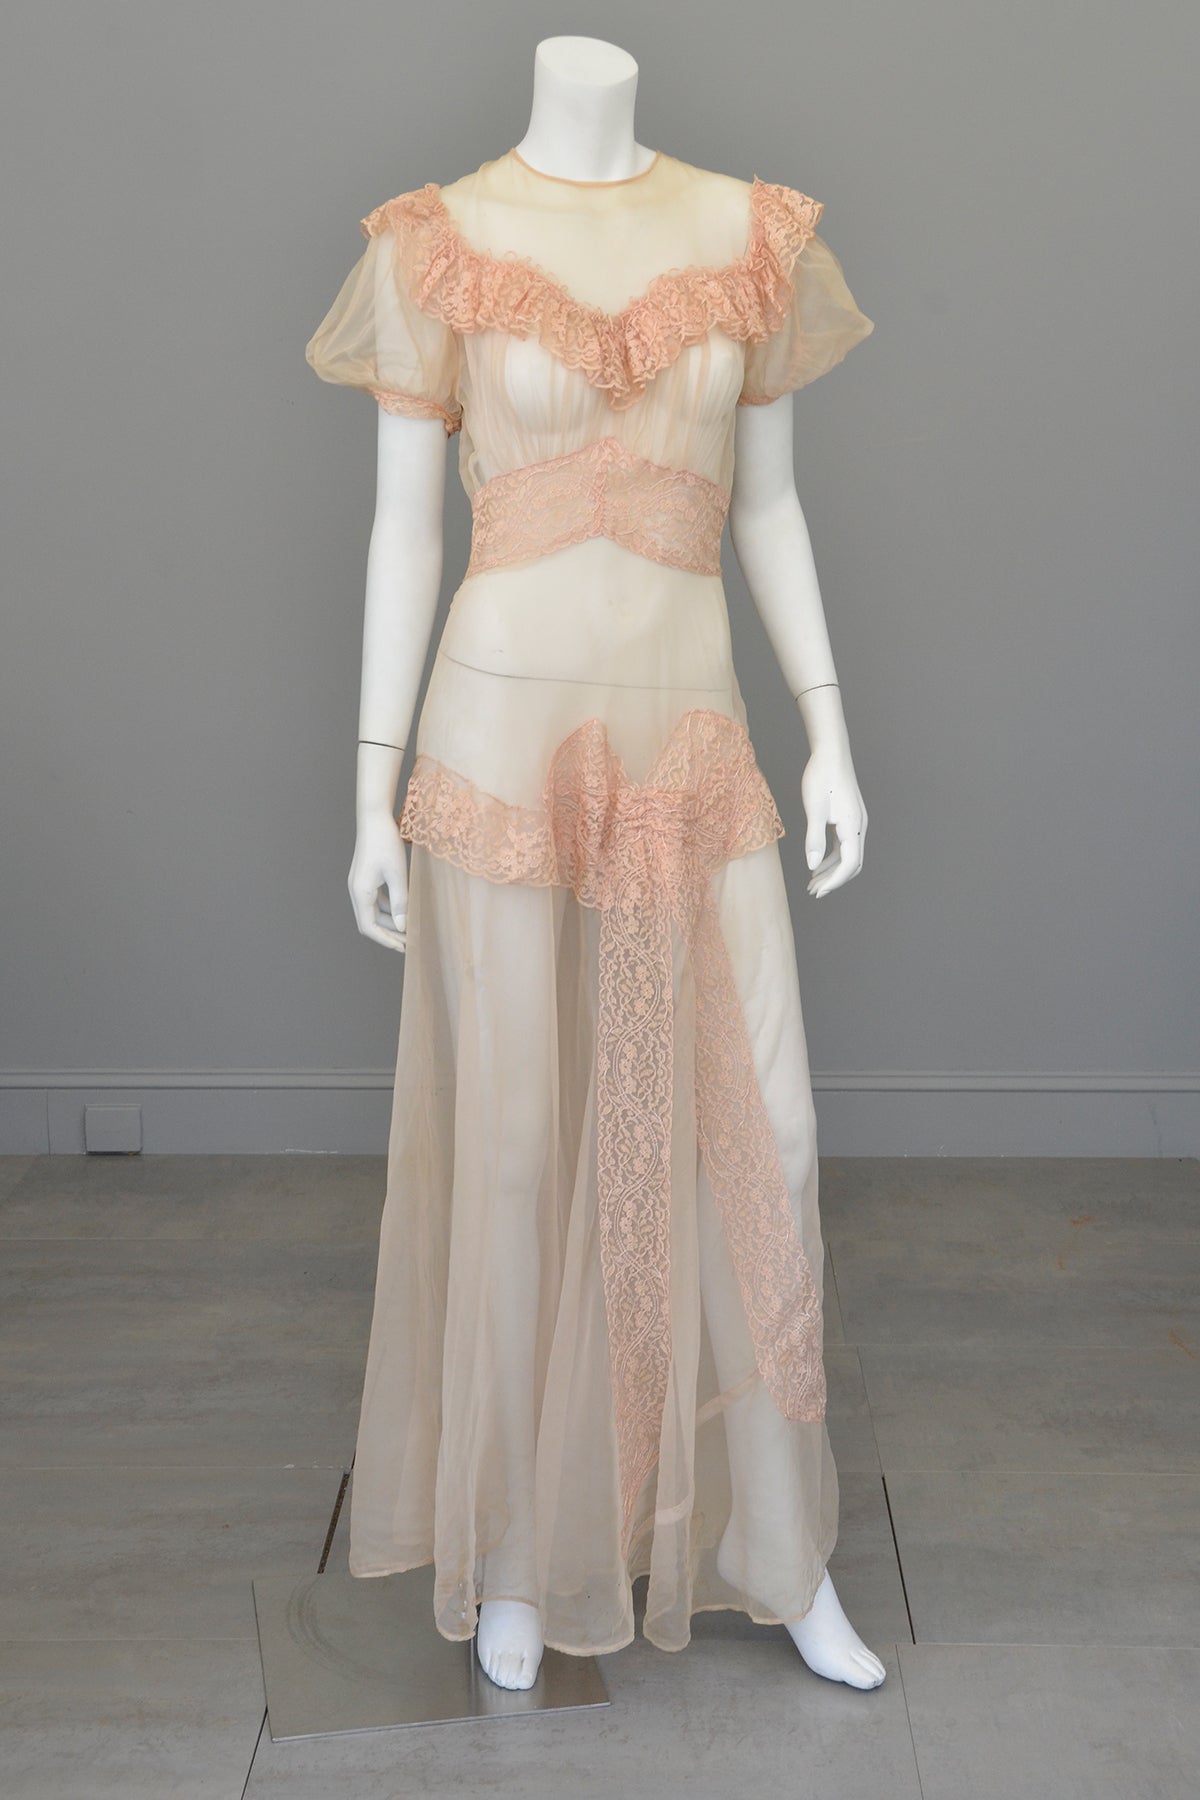 netted gown designs